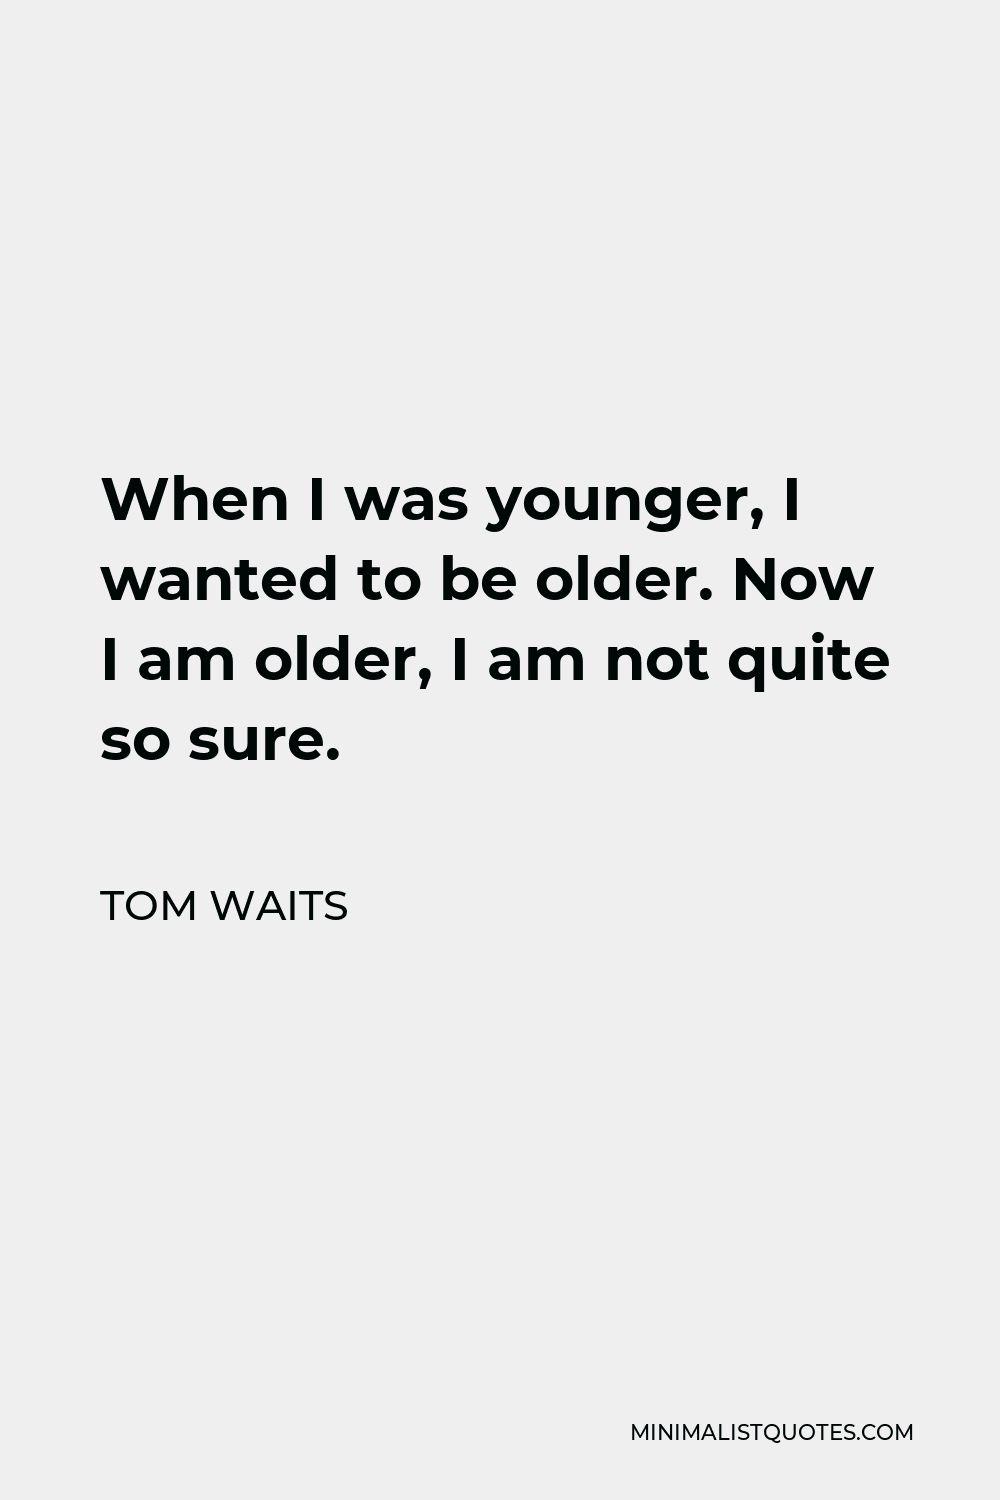 Tom Waits Quote - When I was younger, I wanted to be older. Now I am older, I am not quite so sure.